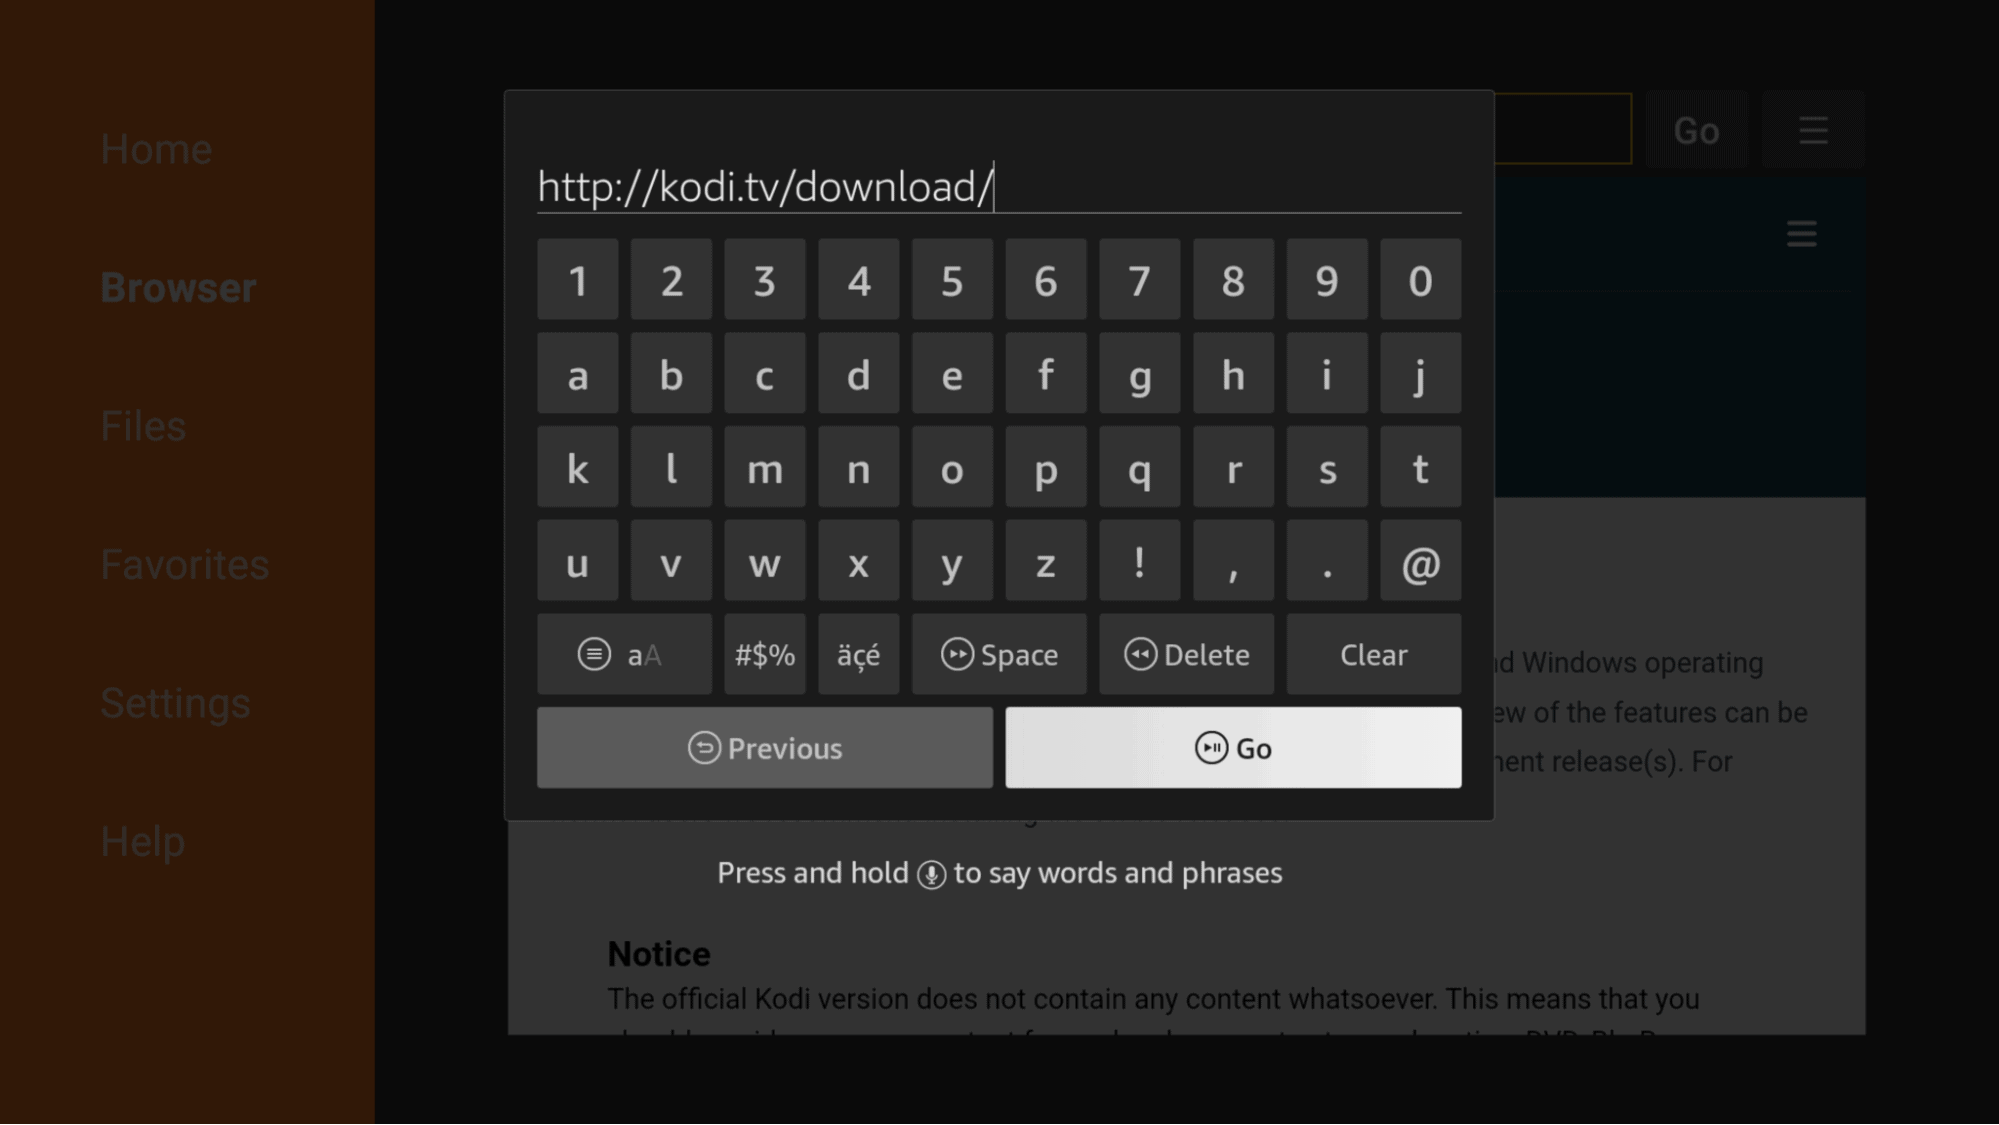 Enter the URL for the Kodi download page